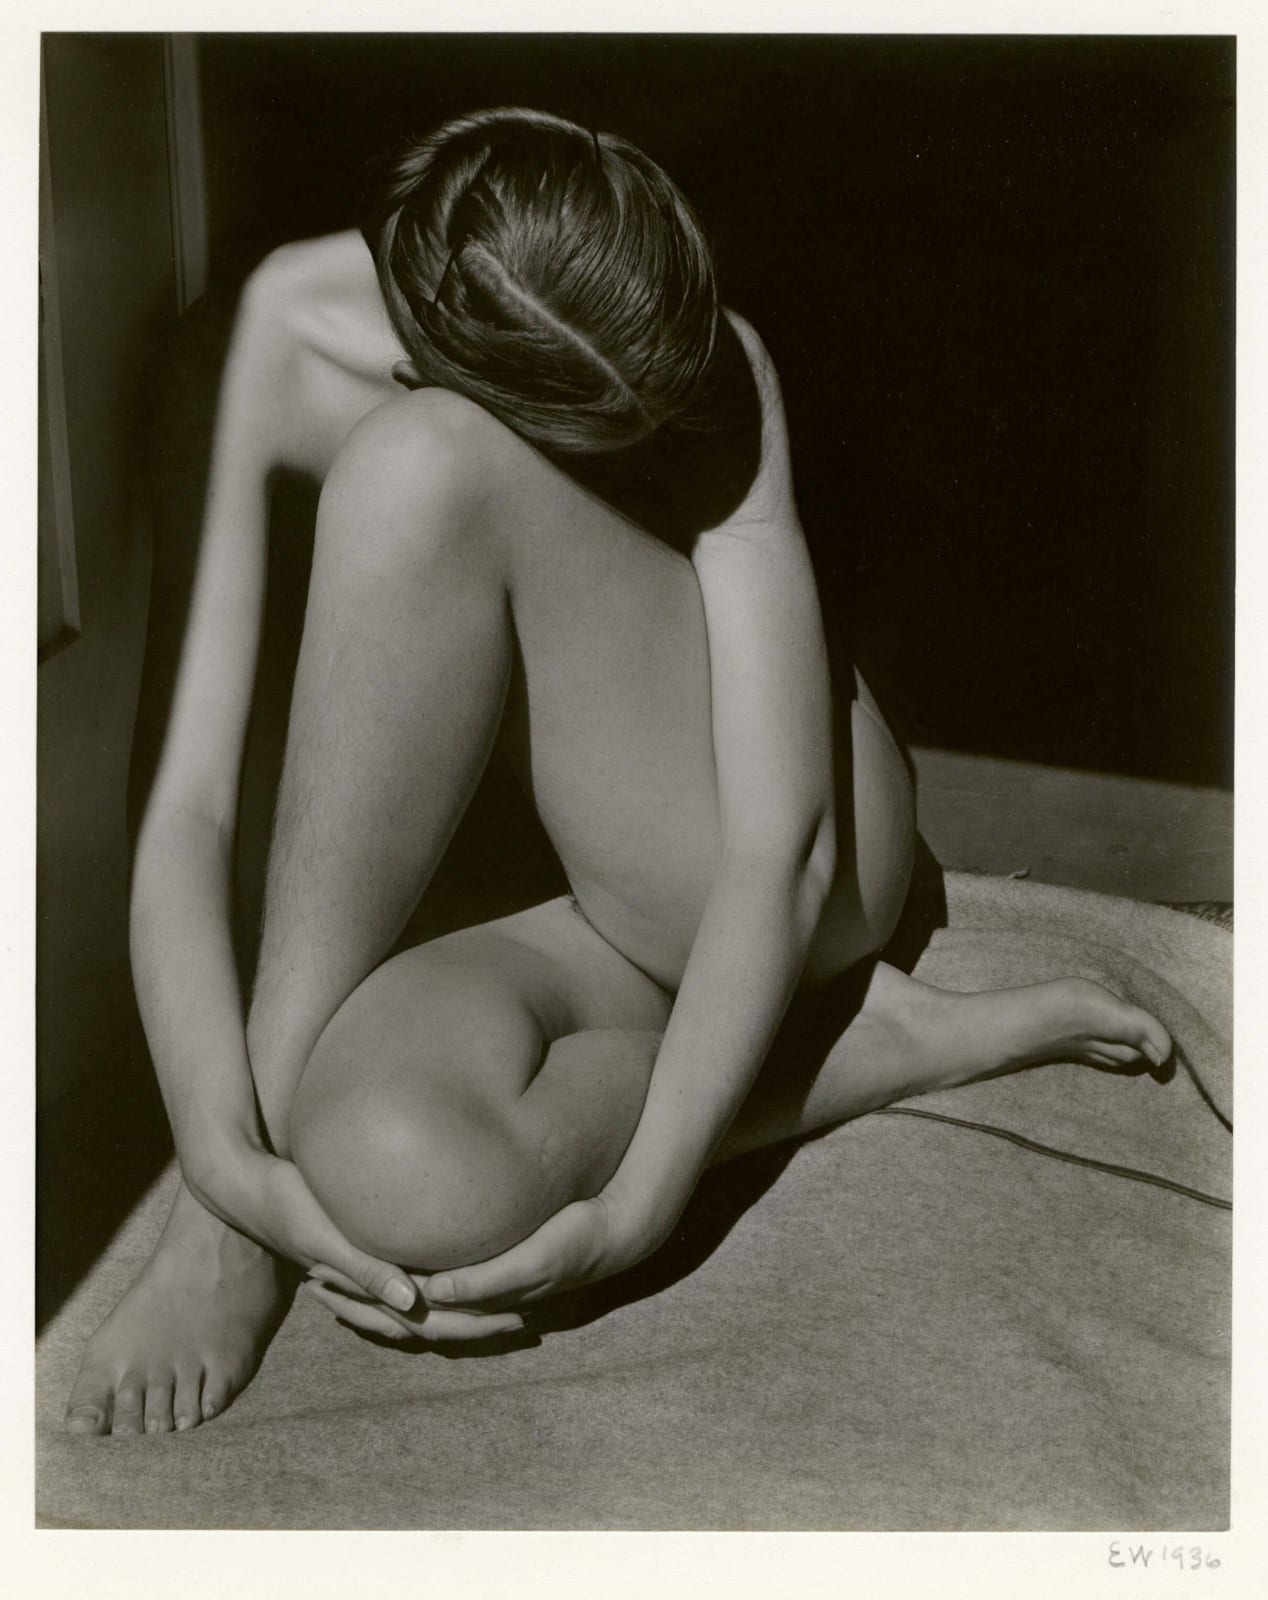 Edward Weston photograph of Charis Weston, nude, sitting in doorway with legs crossed and head resting on thigh